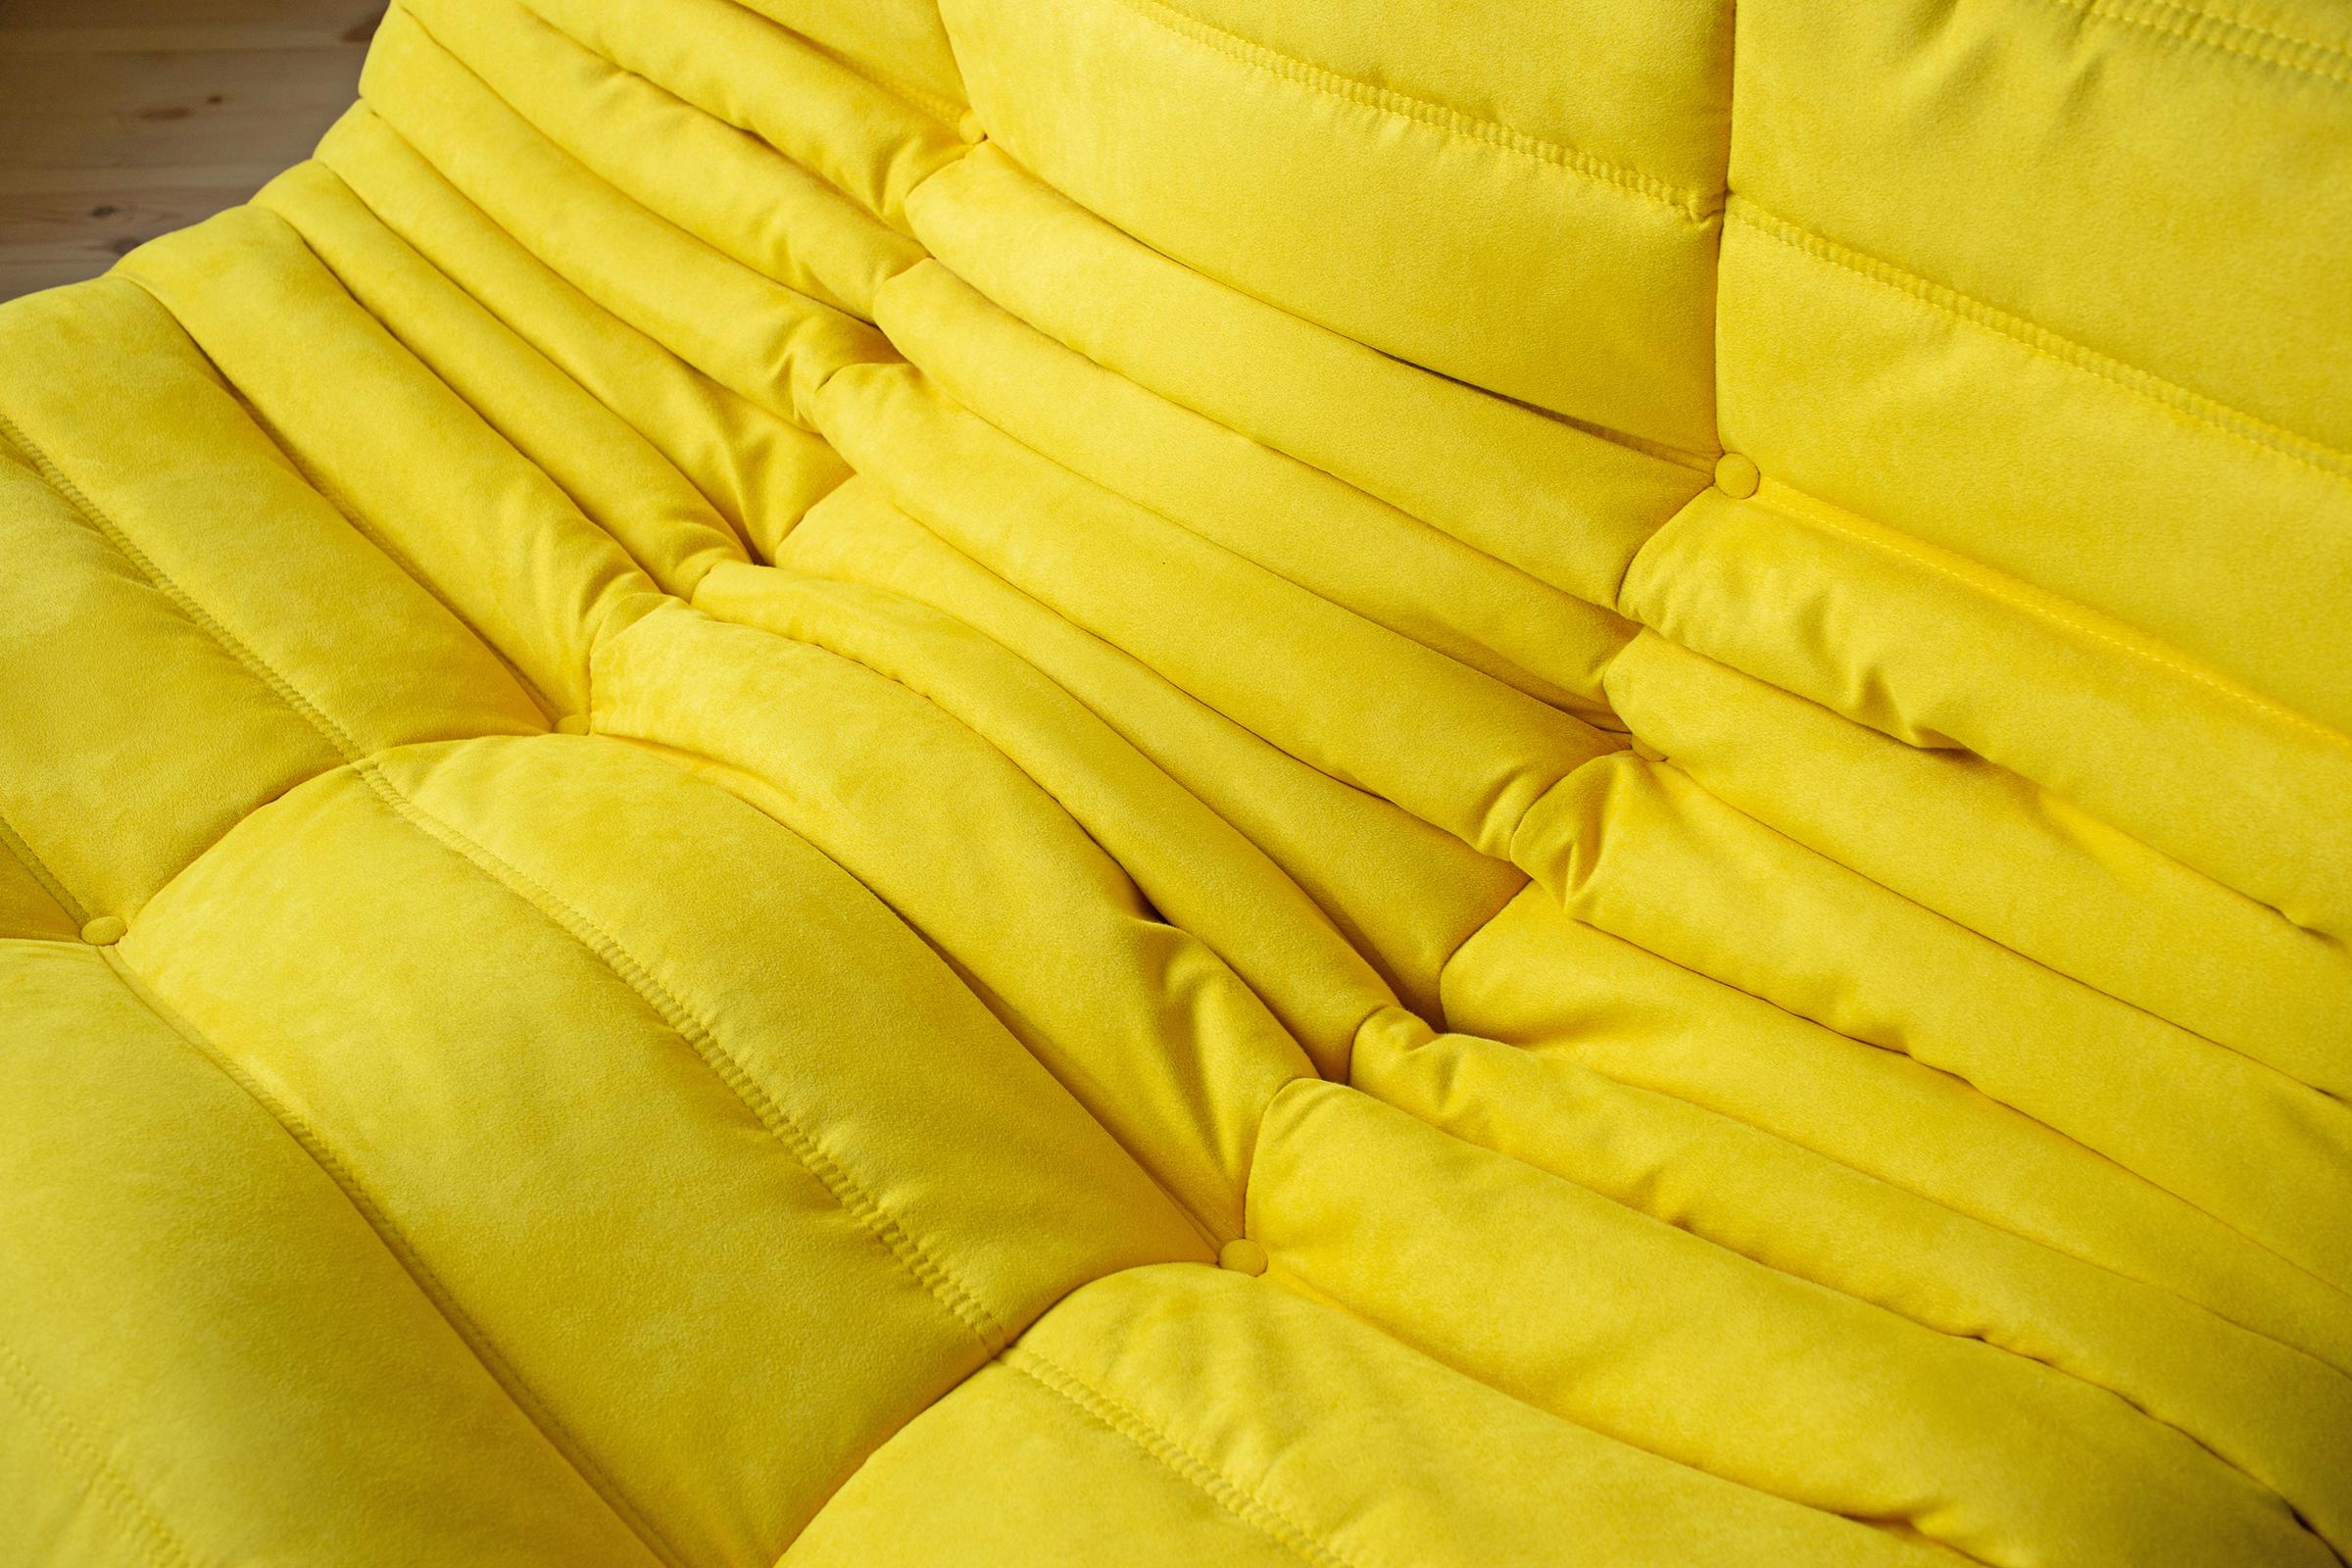 This togo two-seat couch was designed by Michel Ducaroy in 1973 and was manufactured by Ligne Roset in France. It has been reupholstered in new yellow microfibre (131 x 102 x 70 cm). It has the original Ligne Roset logo and genuine Ligne Roset